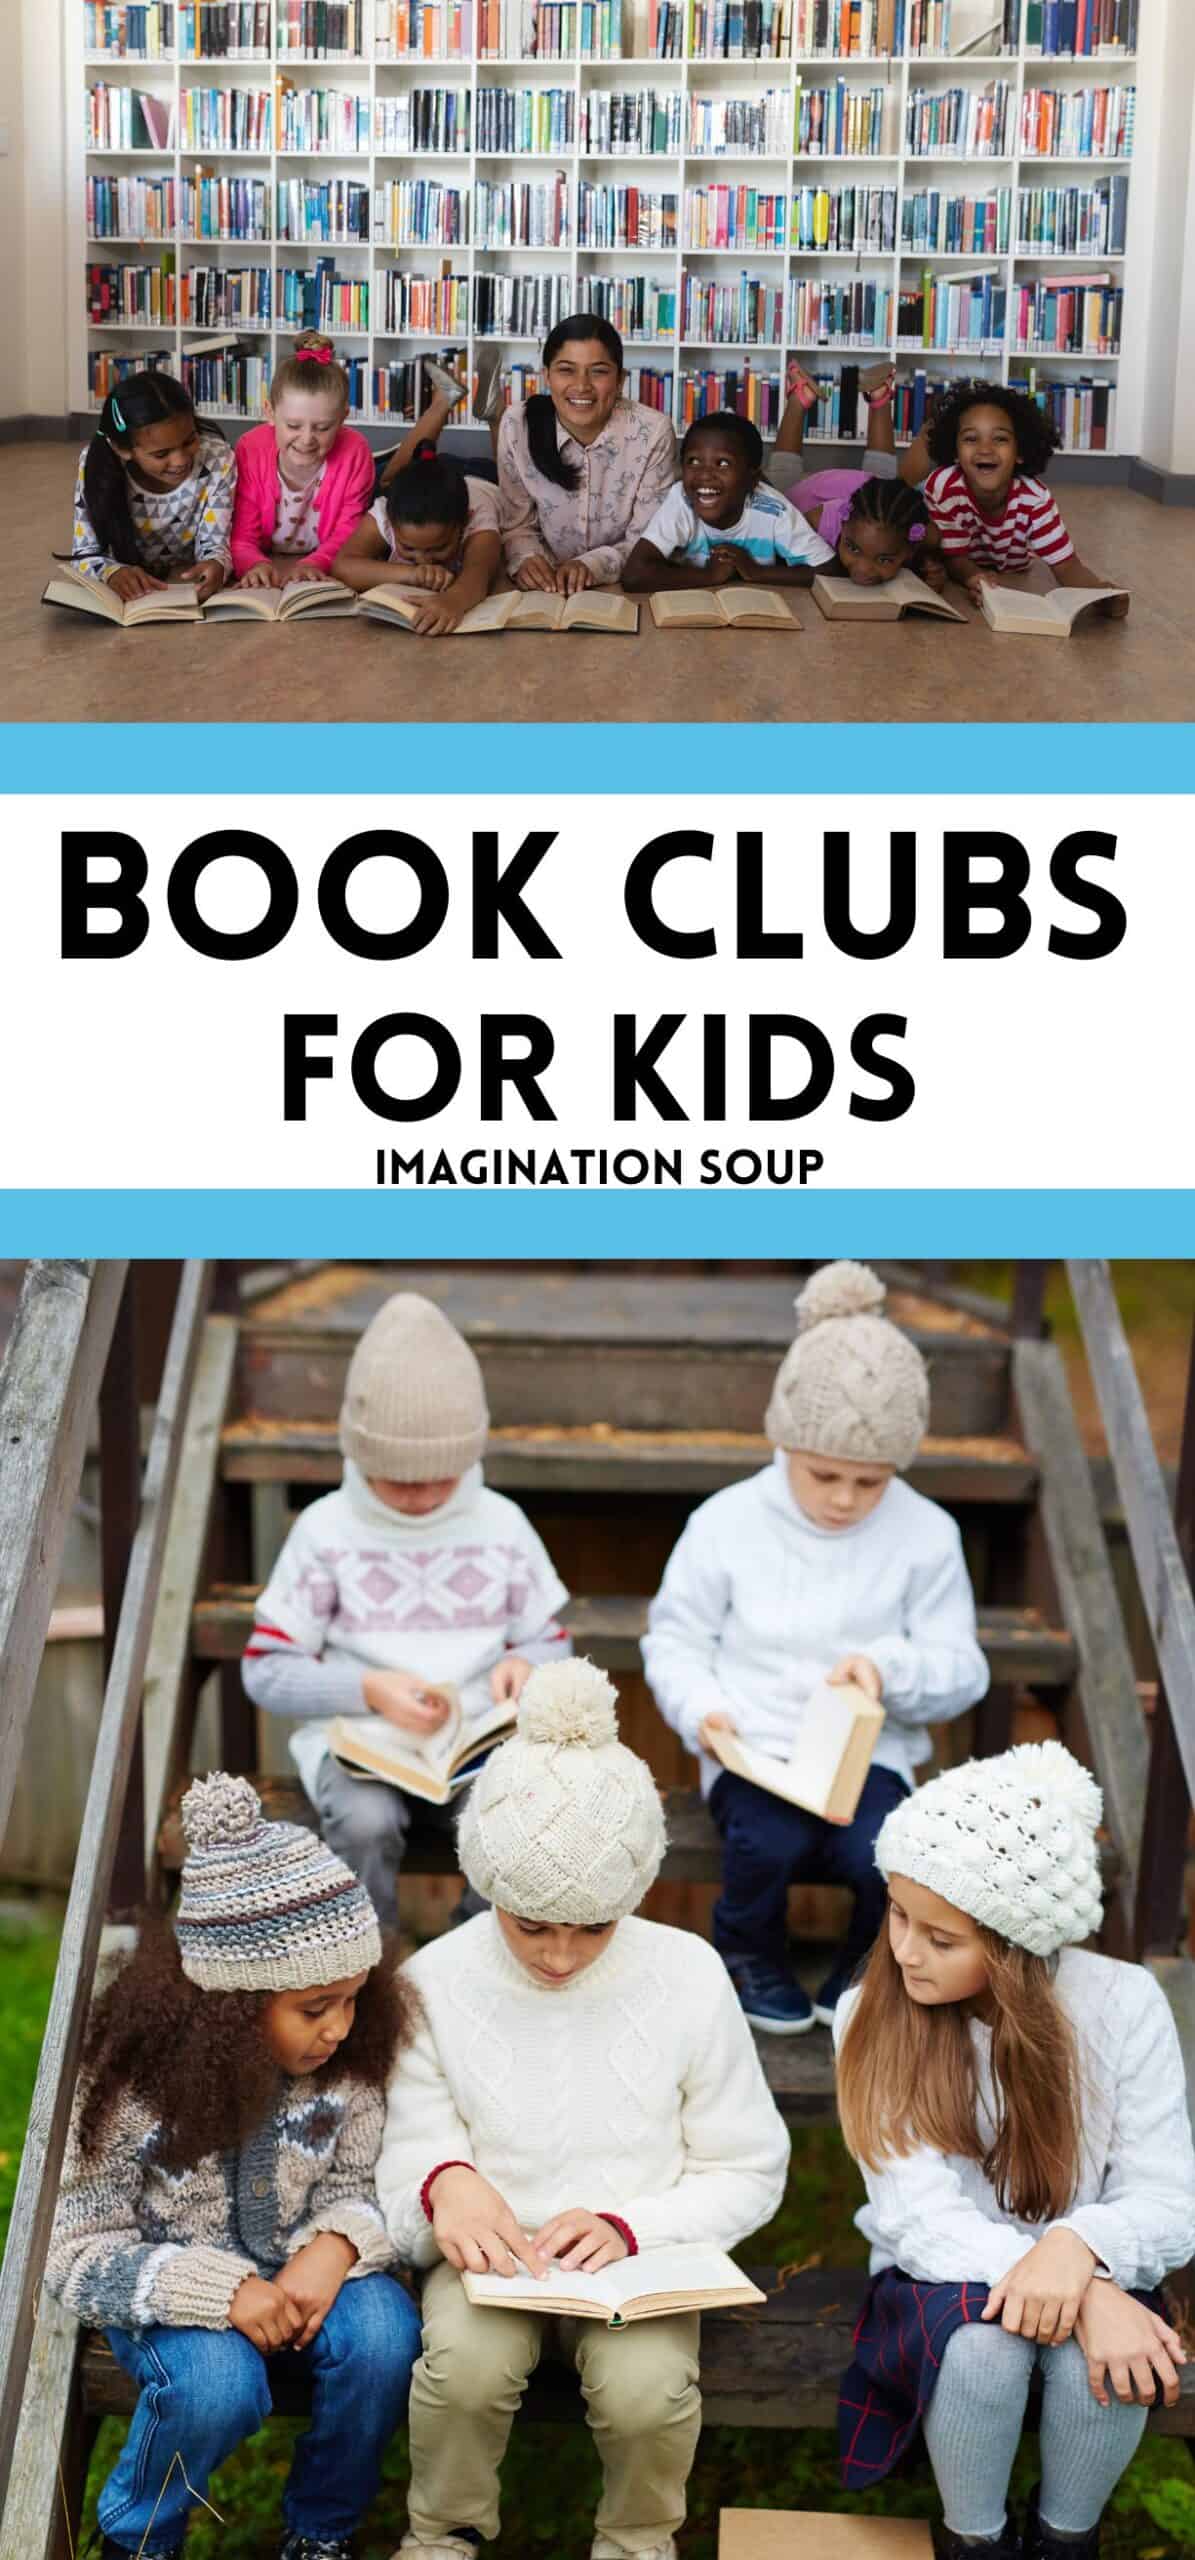 Want to learn about how to start a book club for kids? From an educational perspective, kids' book clubs are rich with skill-building as well as encouraging a love of reading. I'll tell you the benefits and how to set up your book club for success.